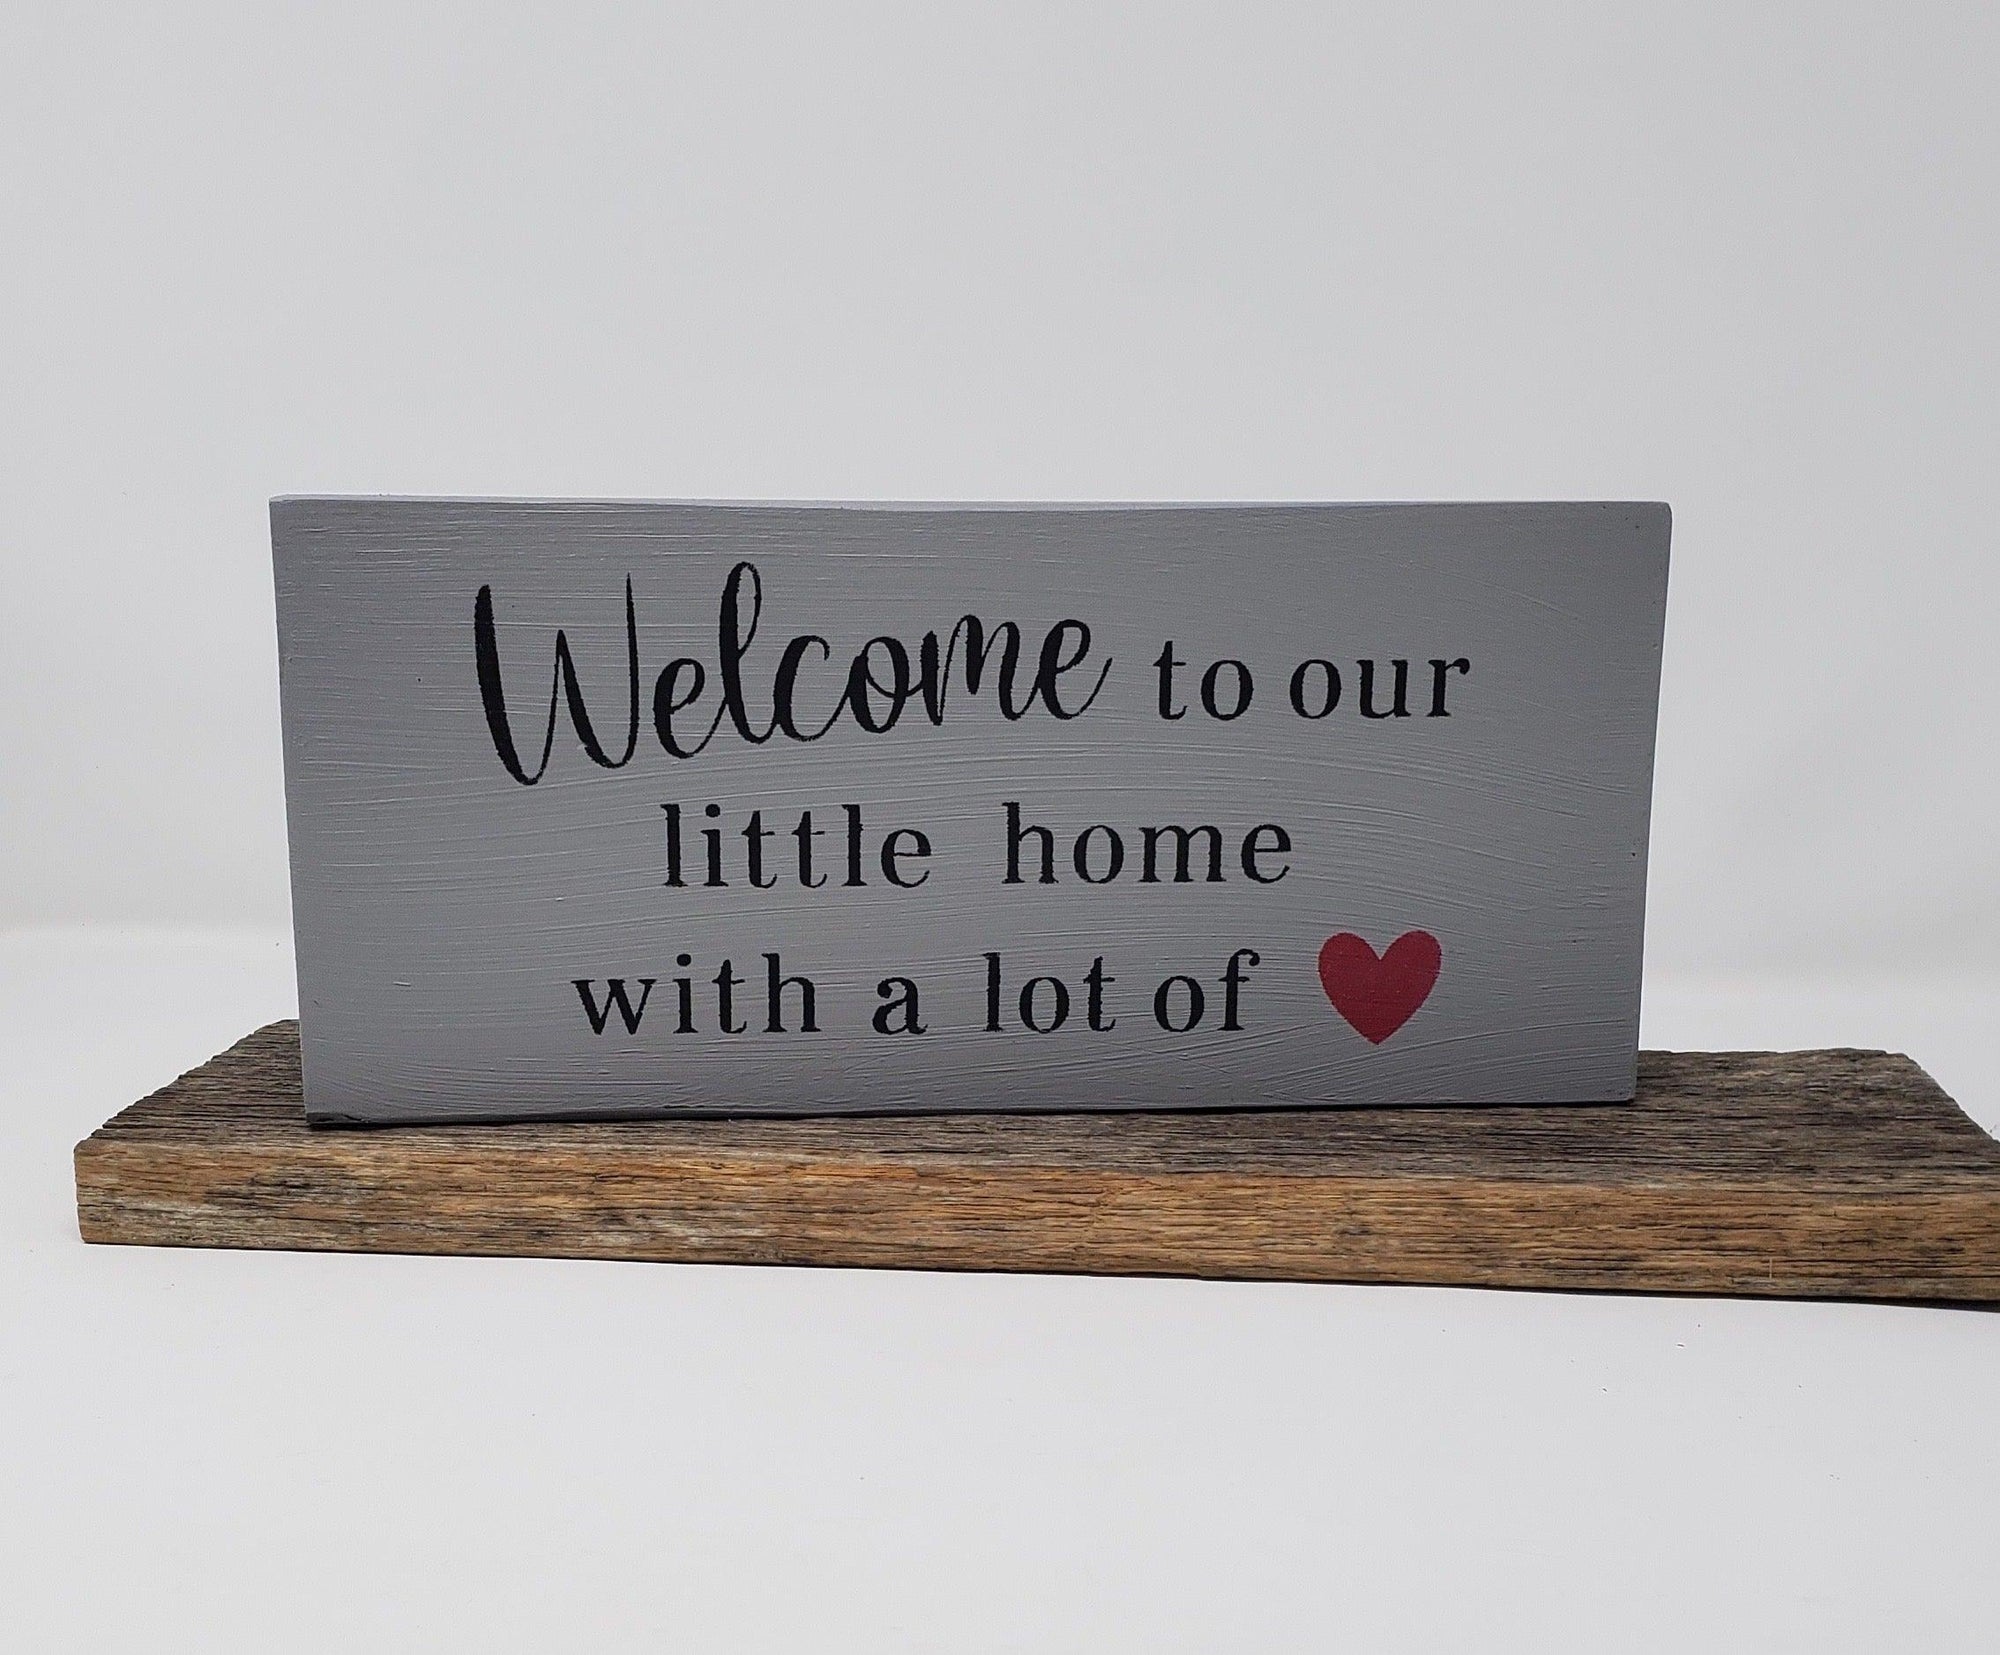 Welcome to our Little Home Rustic Sign - A Rustic Feeling